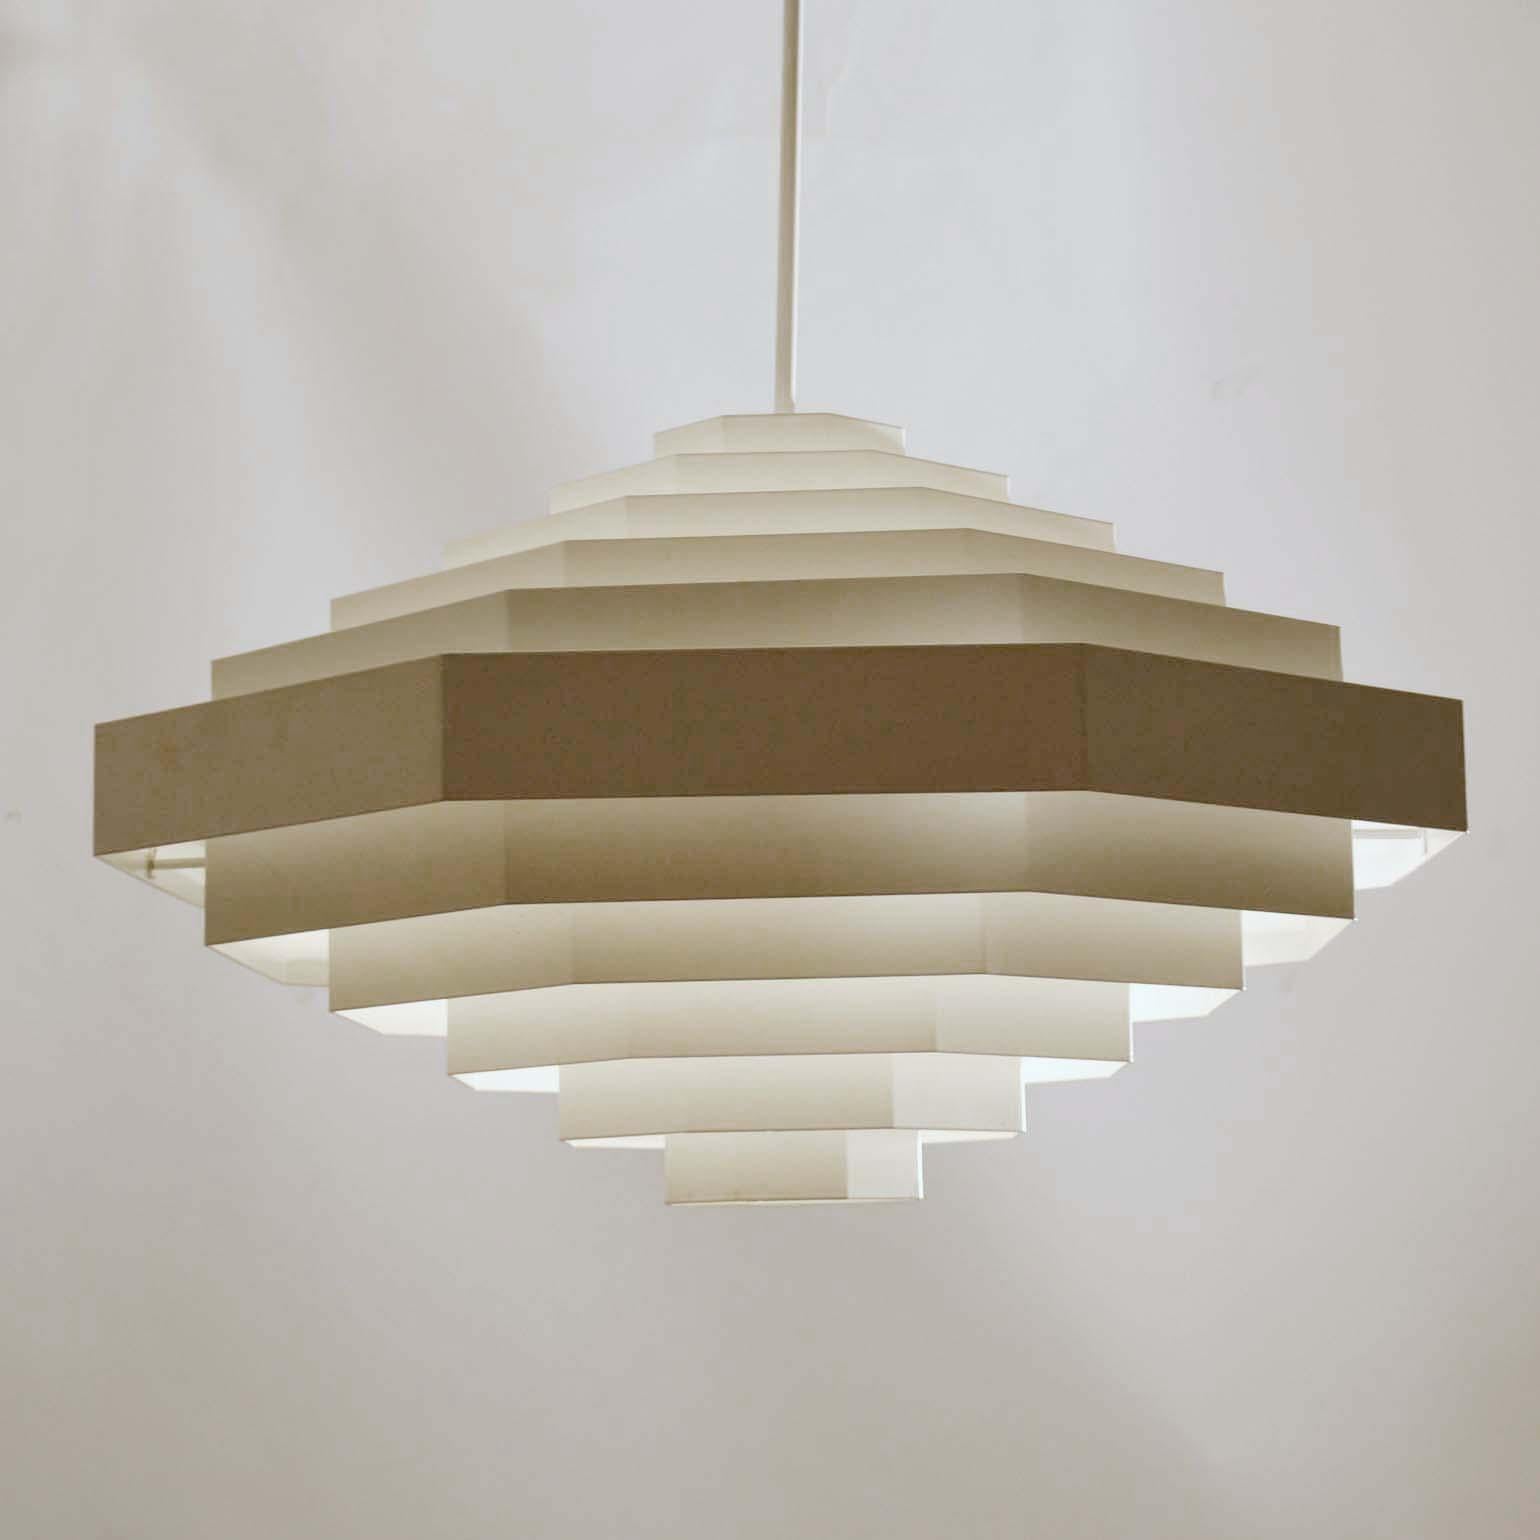 German Pair of Large Bright White Metal Octagonal Origami Chandeliers by Spectral, 1970